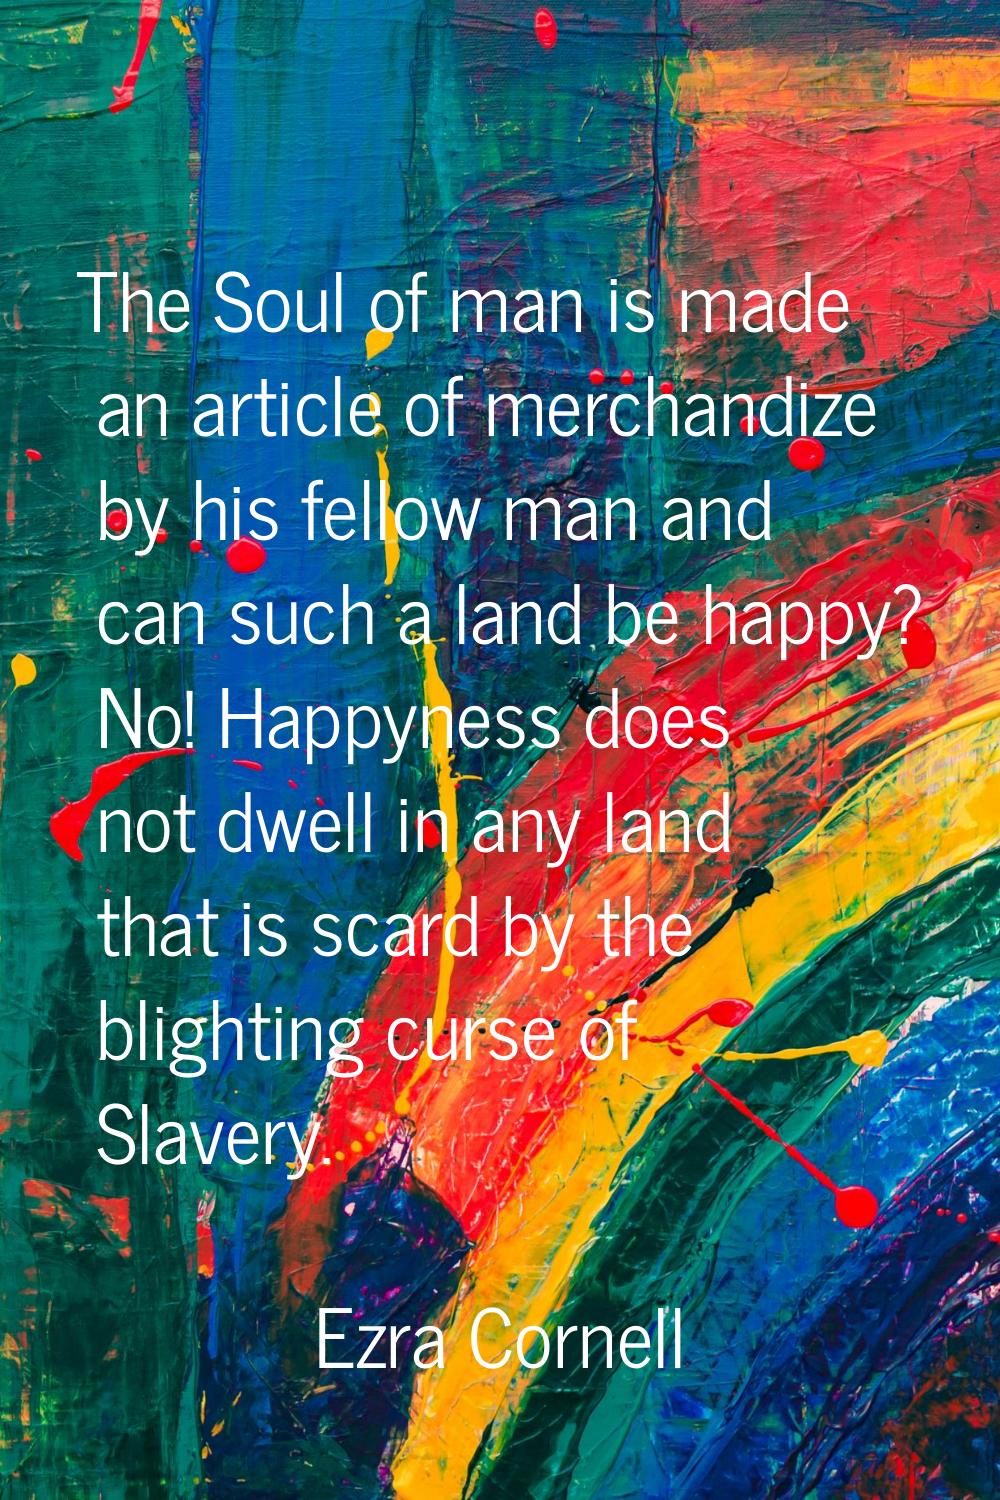 The Soul of man is made an article of merchandize by his fellow man and can such a land be happy? N